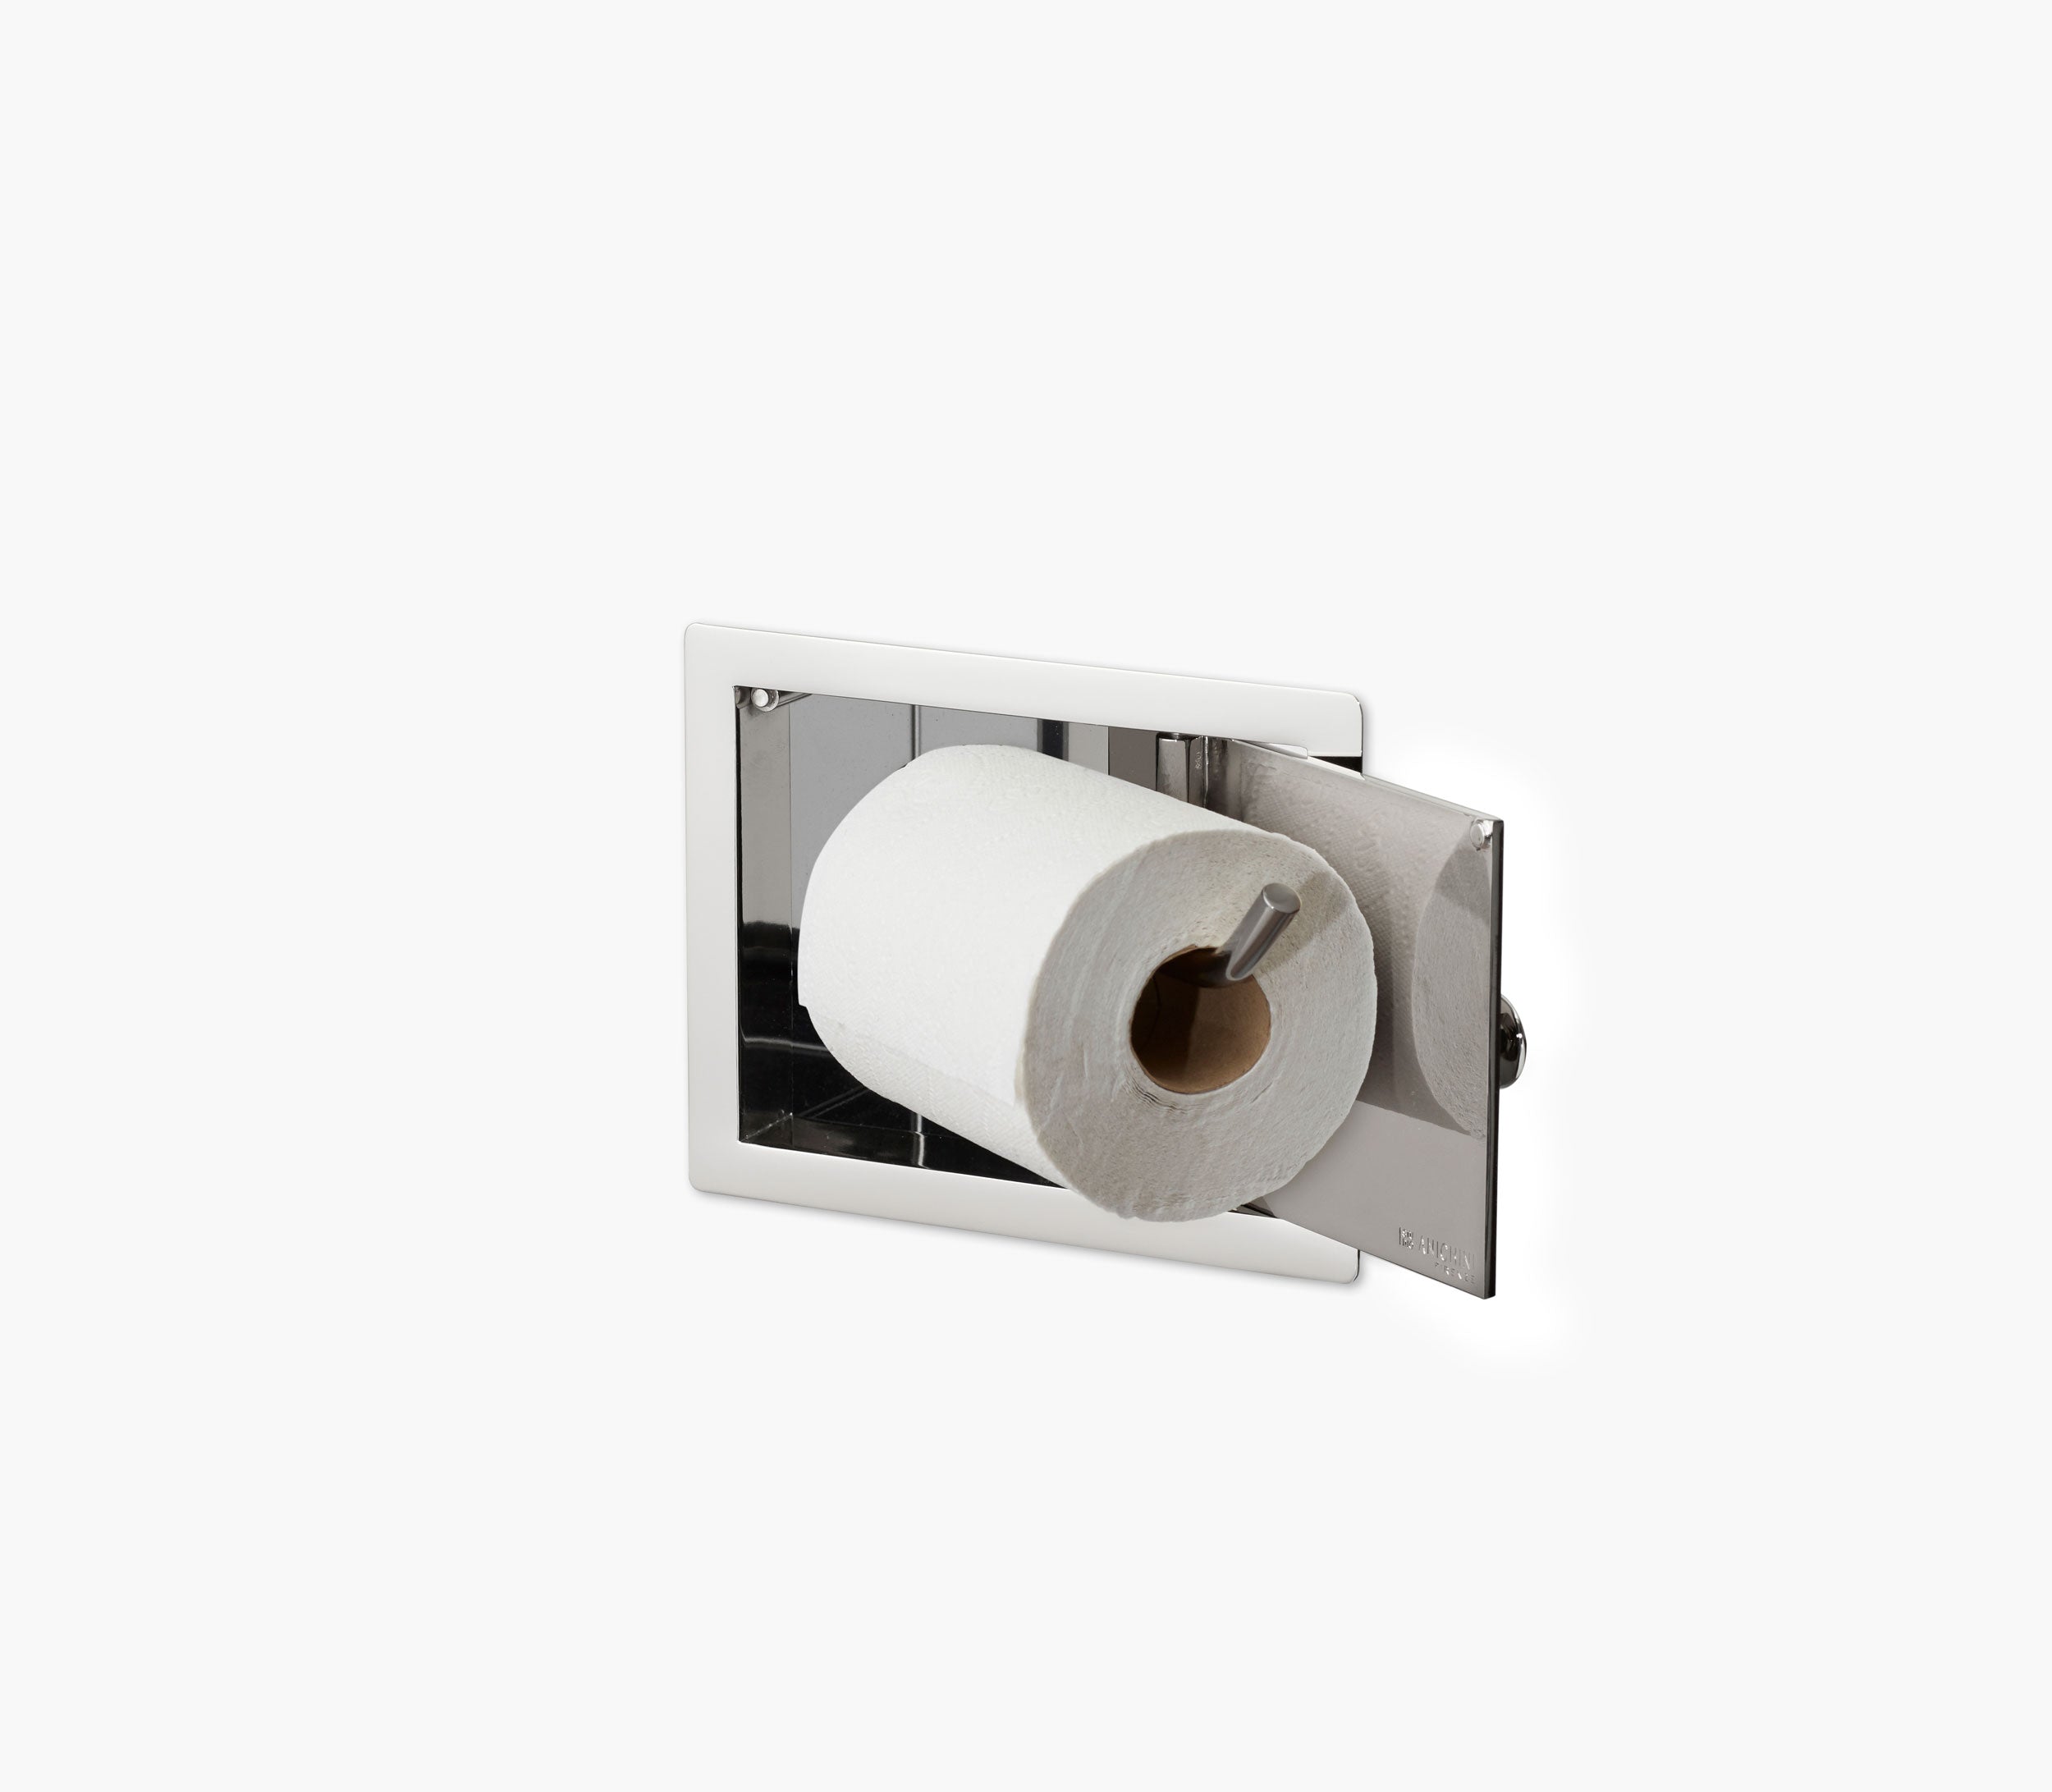 Wall Recessed Toilet Paper Holder II Open Left Product Image 2